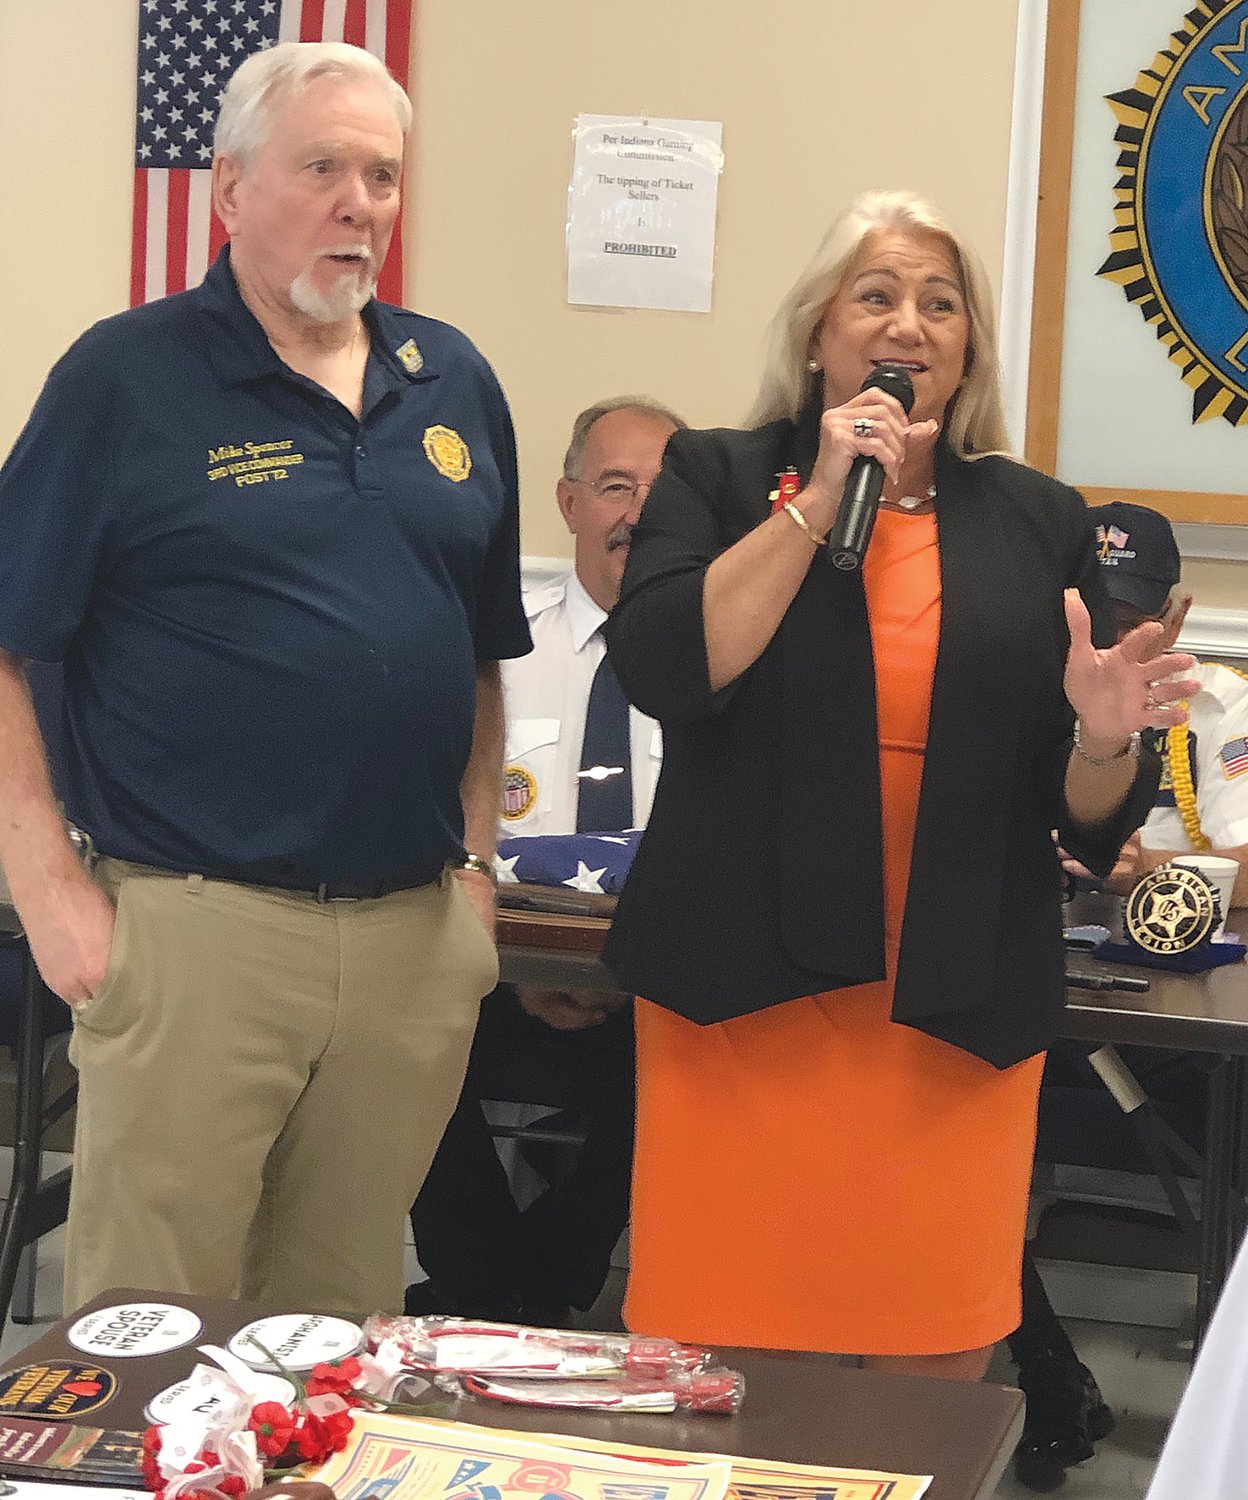 Jill Fewell, right, executive director of the Welcome Home Vietnam Veterans, thanks Mike Spencer for organizing the Veterans Expo.